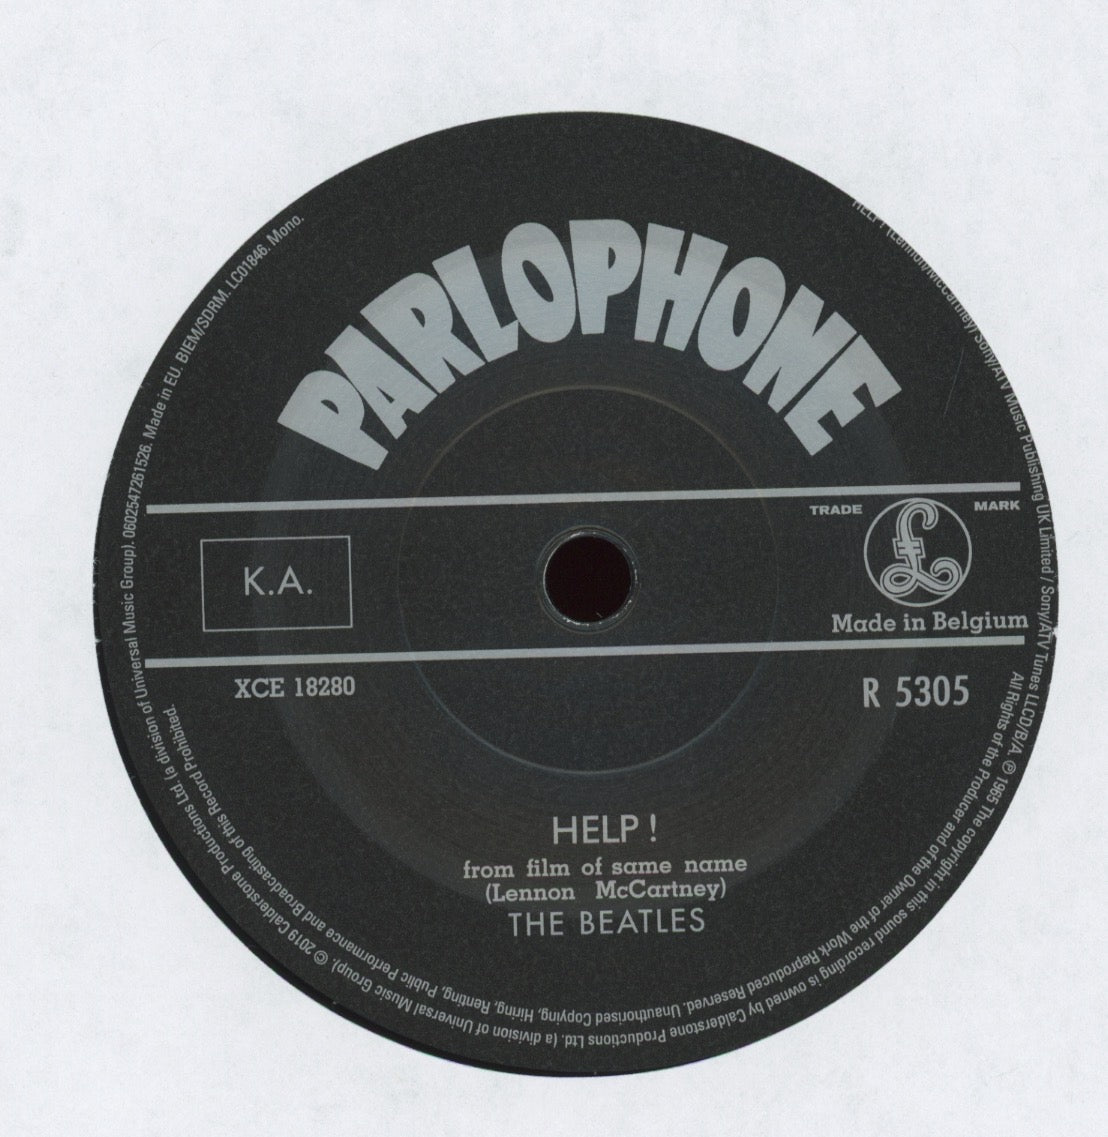 The Beatles - Help! / I’m Down on Parlophone 7" Reissue With Picture Cover